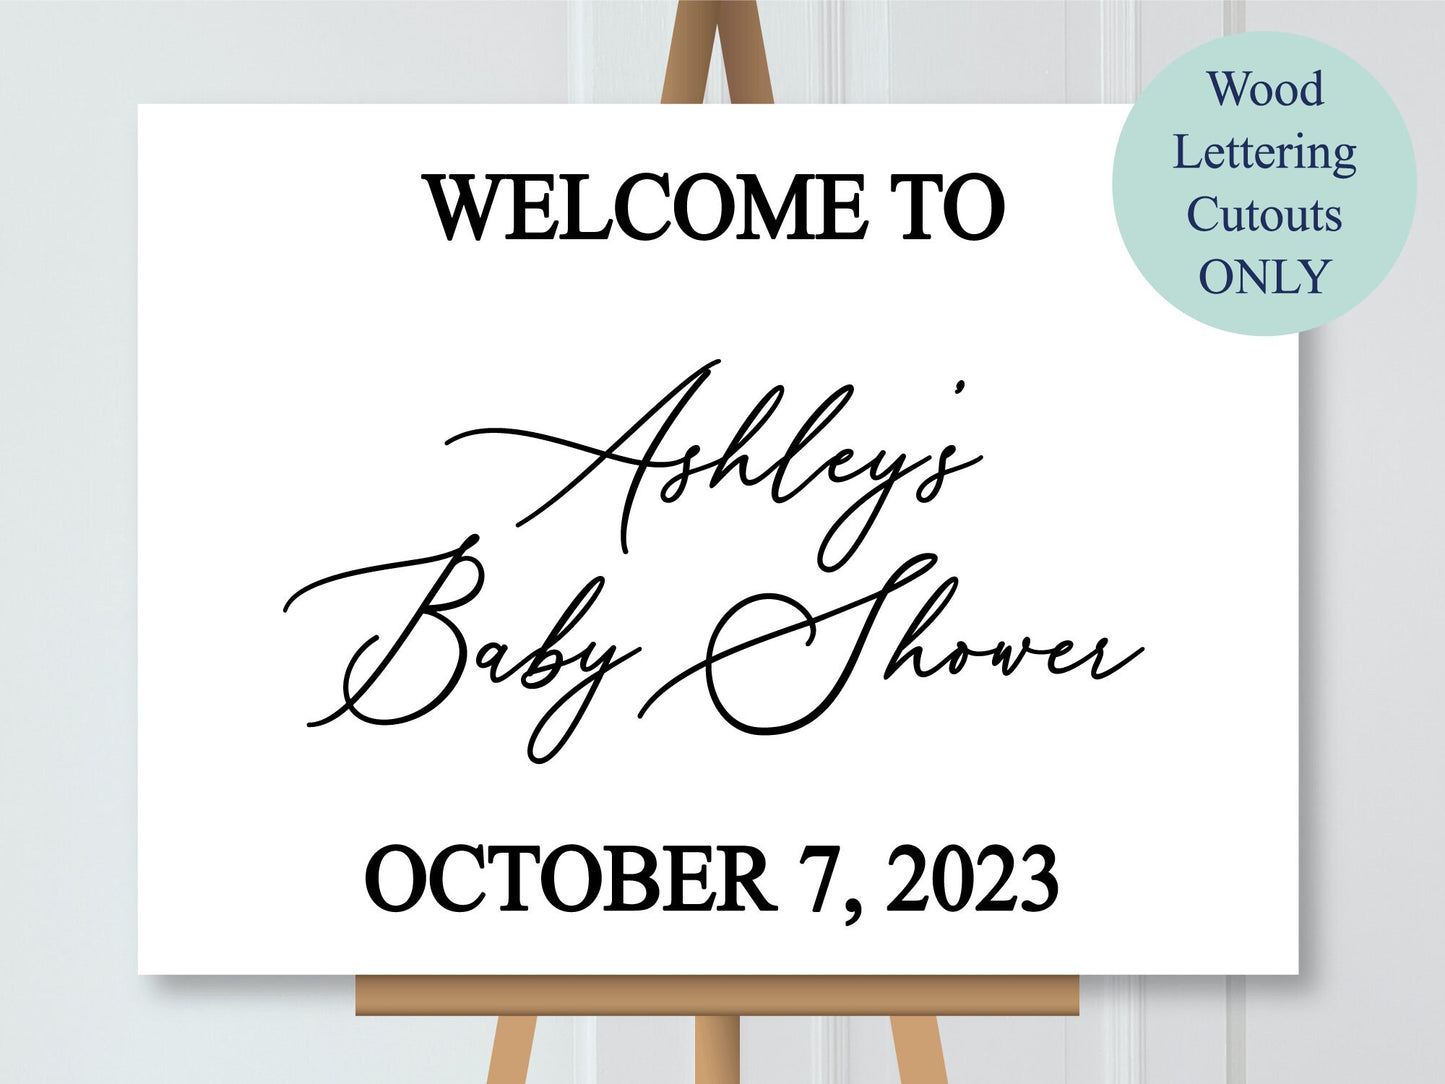 Wood lettering ONLY, DIY baby shower welcome sign for baby shower decor, wooden name sign, date wood signs keepsake heirloom for mom to be